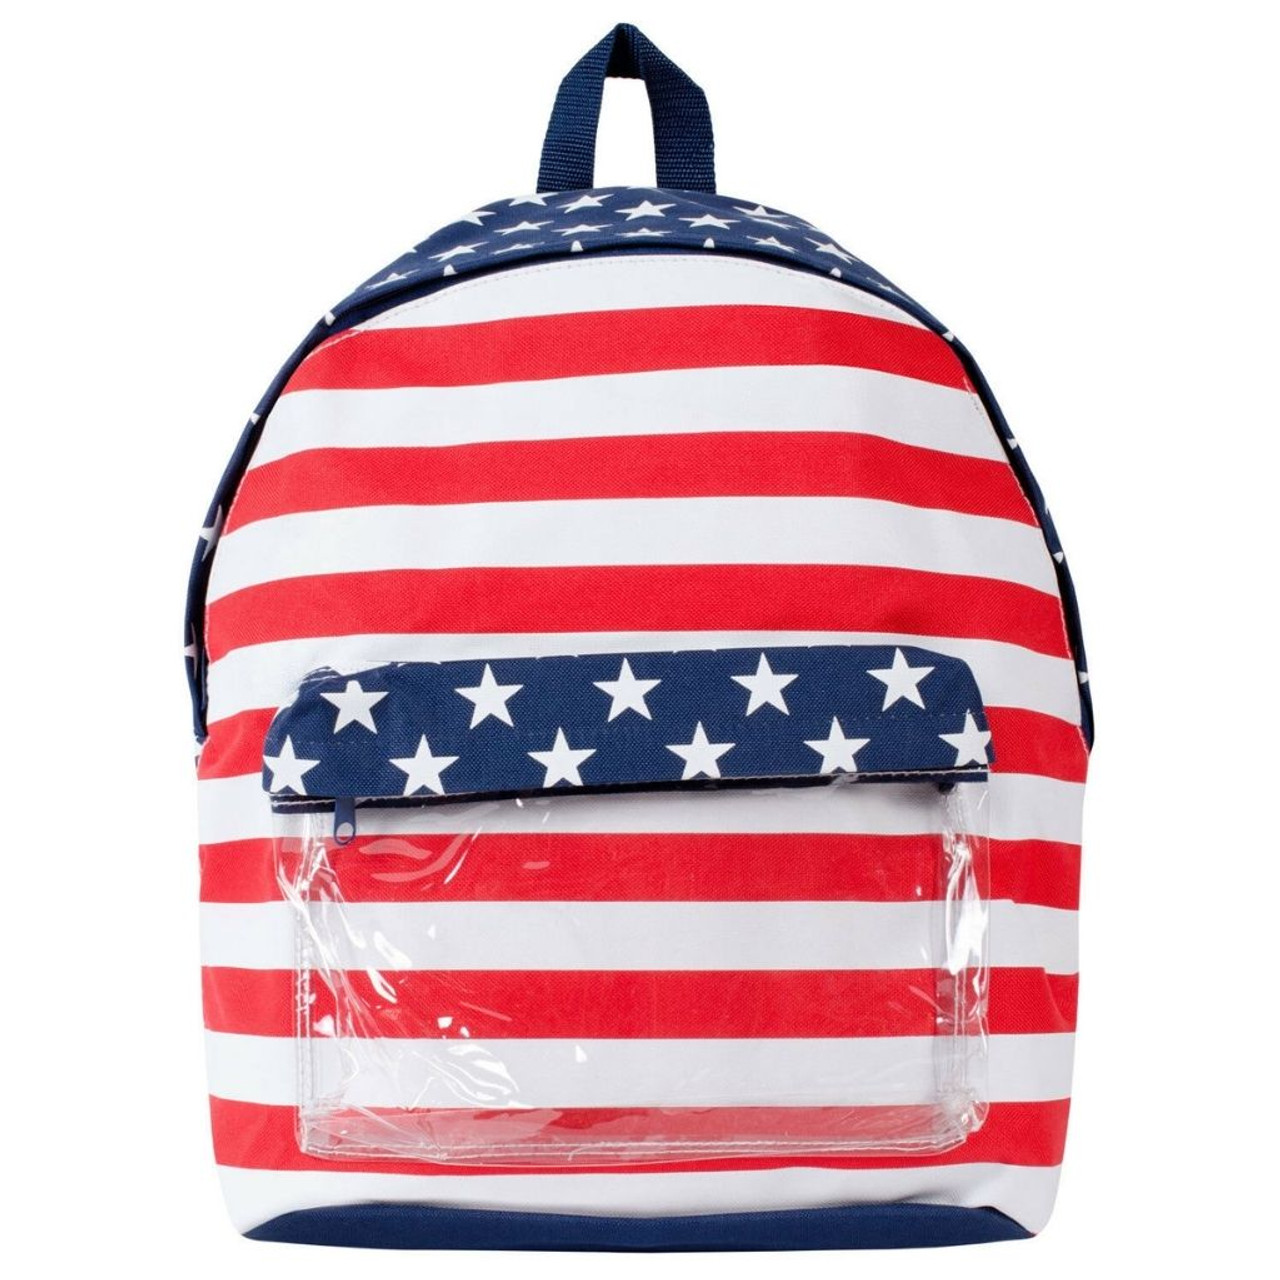 Lightweight Patriotic American Flag Laptop Backpack product image